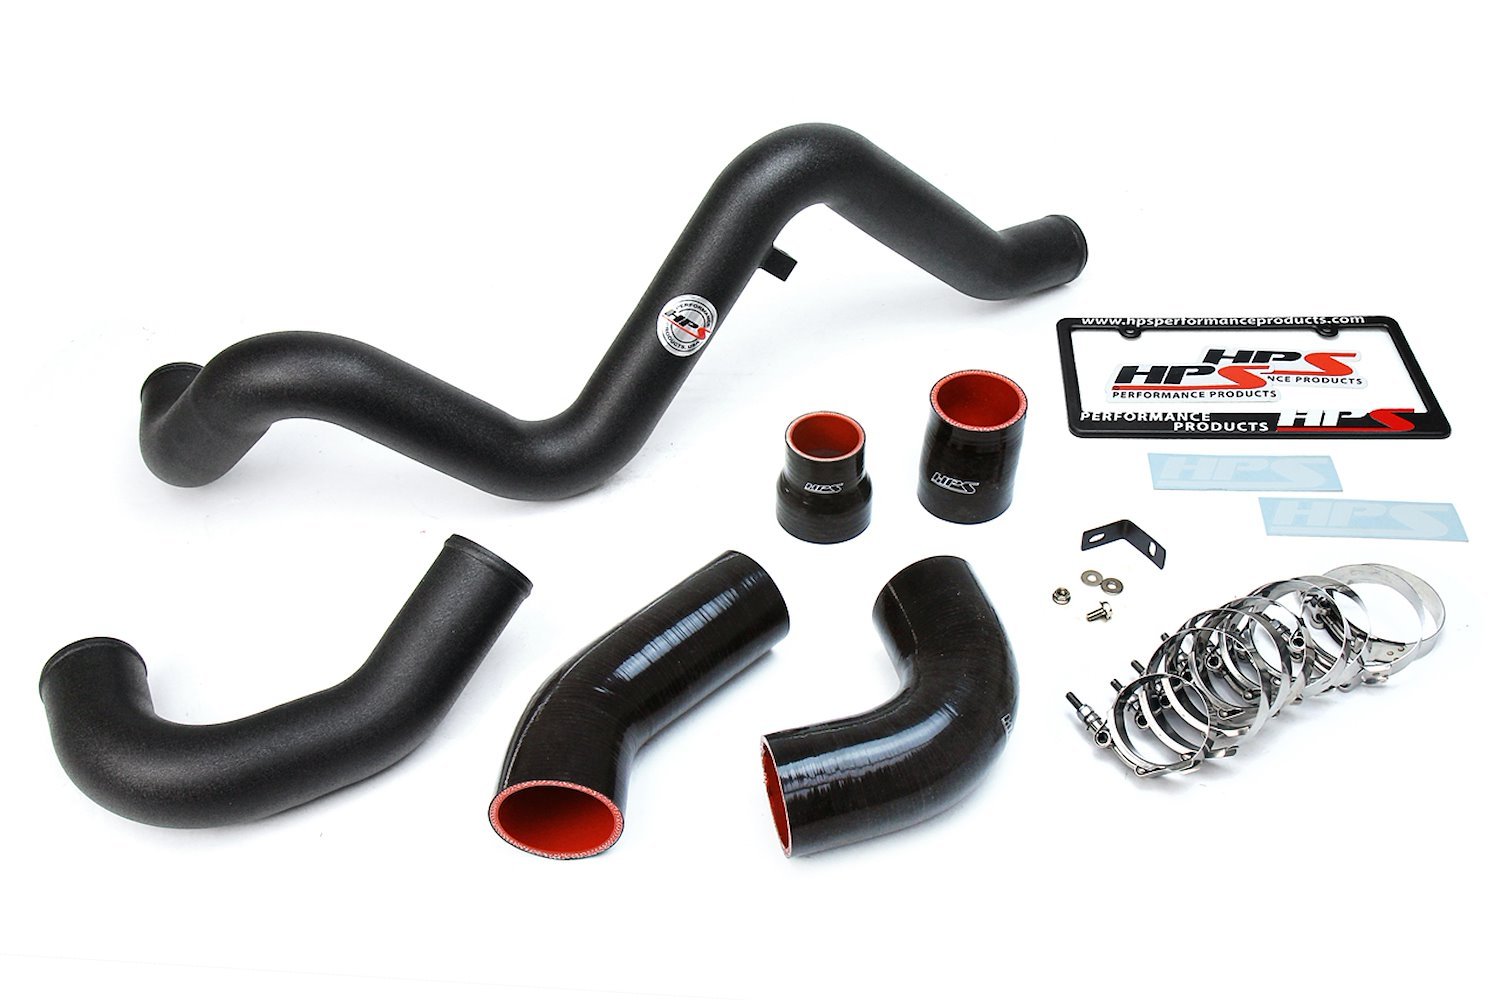 17-104WB Turbo Charge Pipe Kit, Replace Stock Charge Pipe, Improve Throttle Response, Reduce Turbo Lag